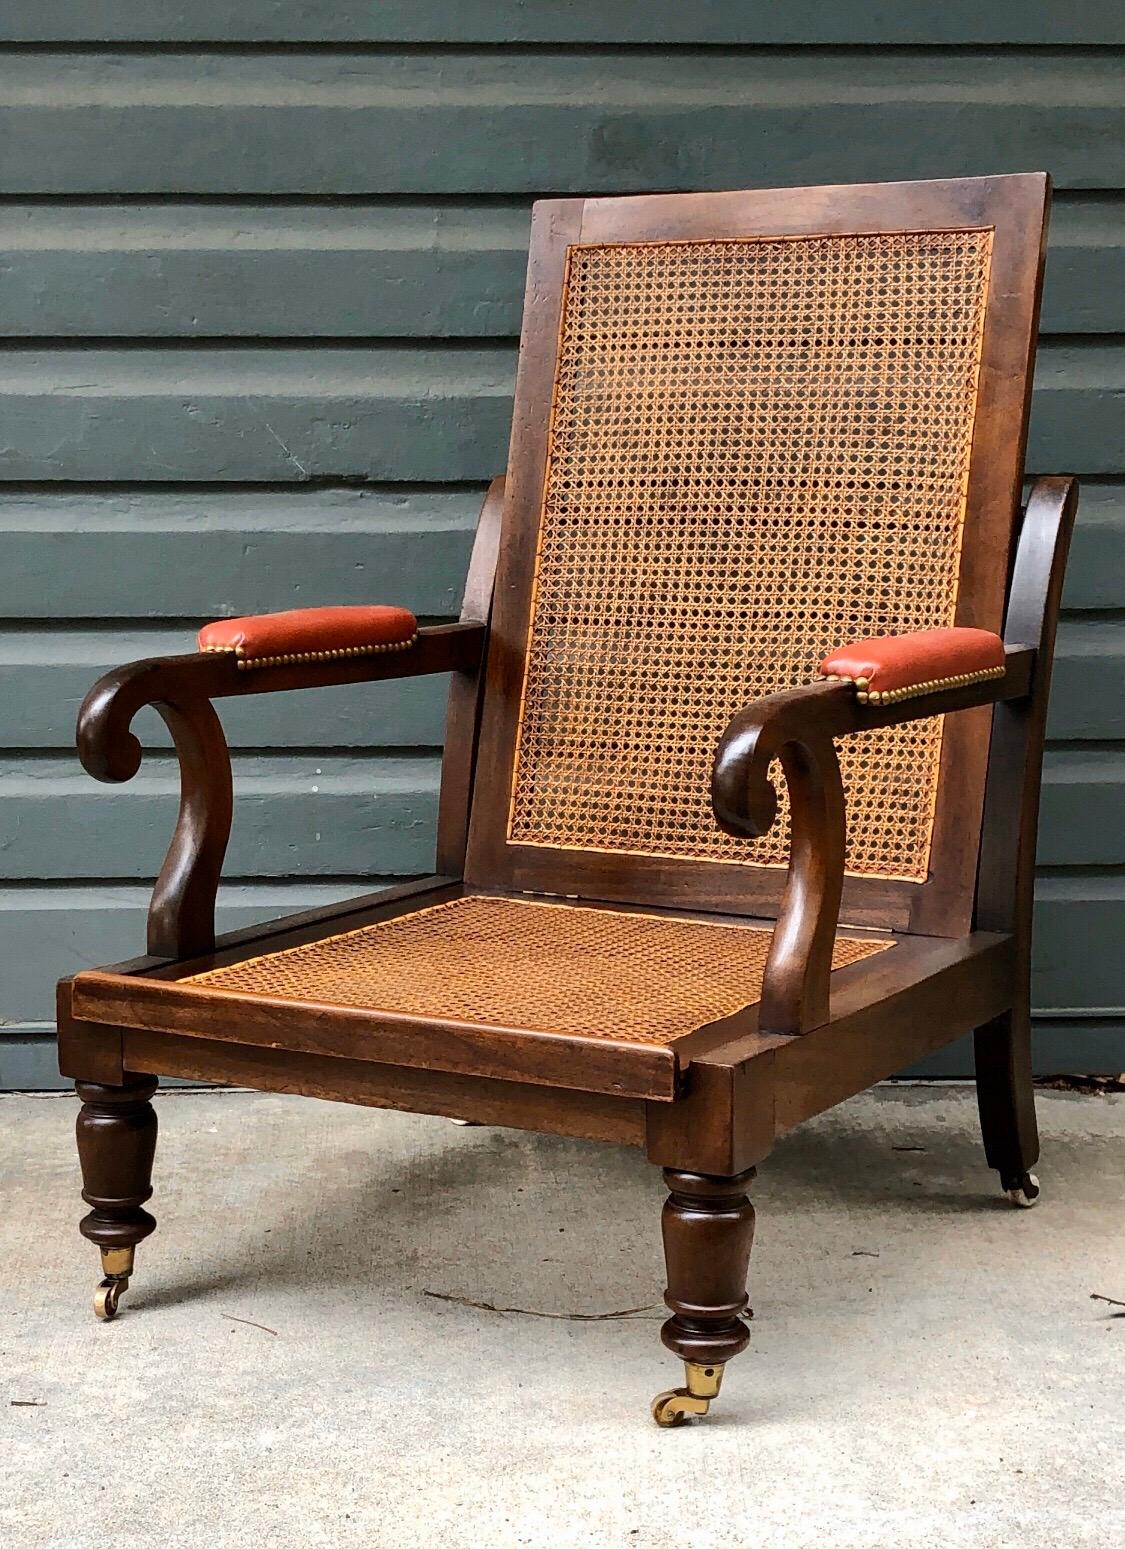 Regency period mahogany Campaign library bergère chair having a removable sliding cane seat and back. This chair has scrolled arms above turned tapered legs with brass casters.